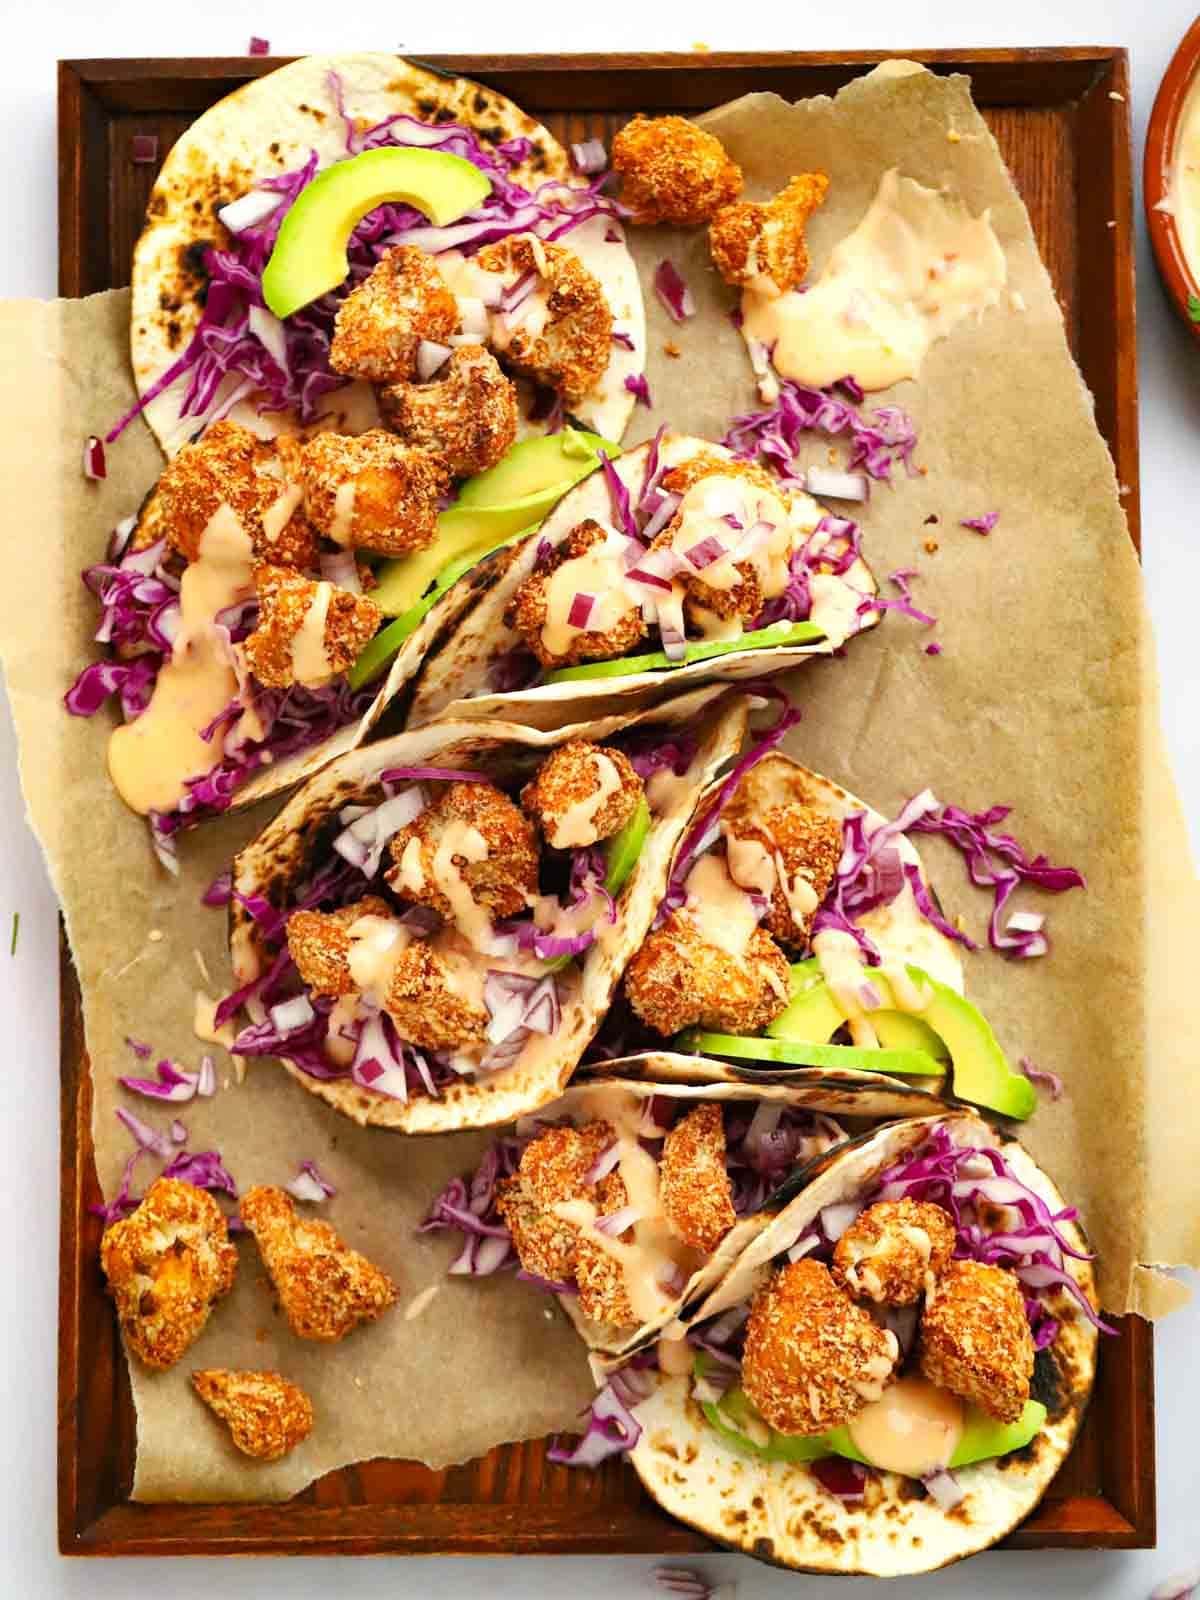 Cauliflower Tacos placed together on a tray, ready for sharing.